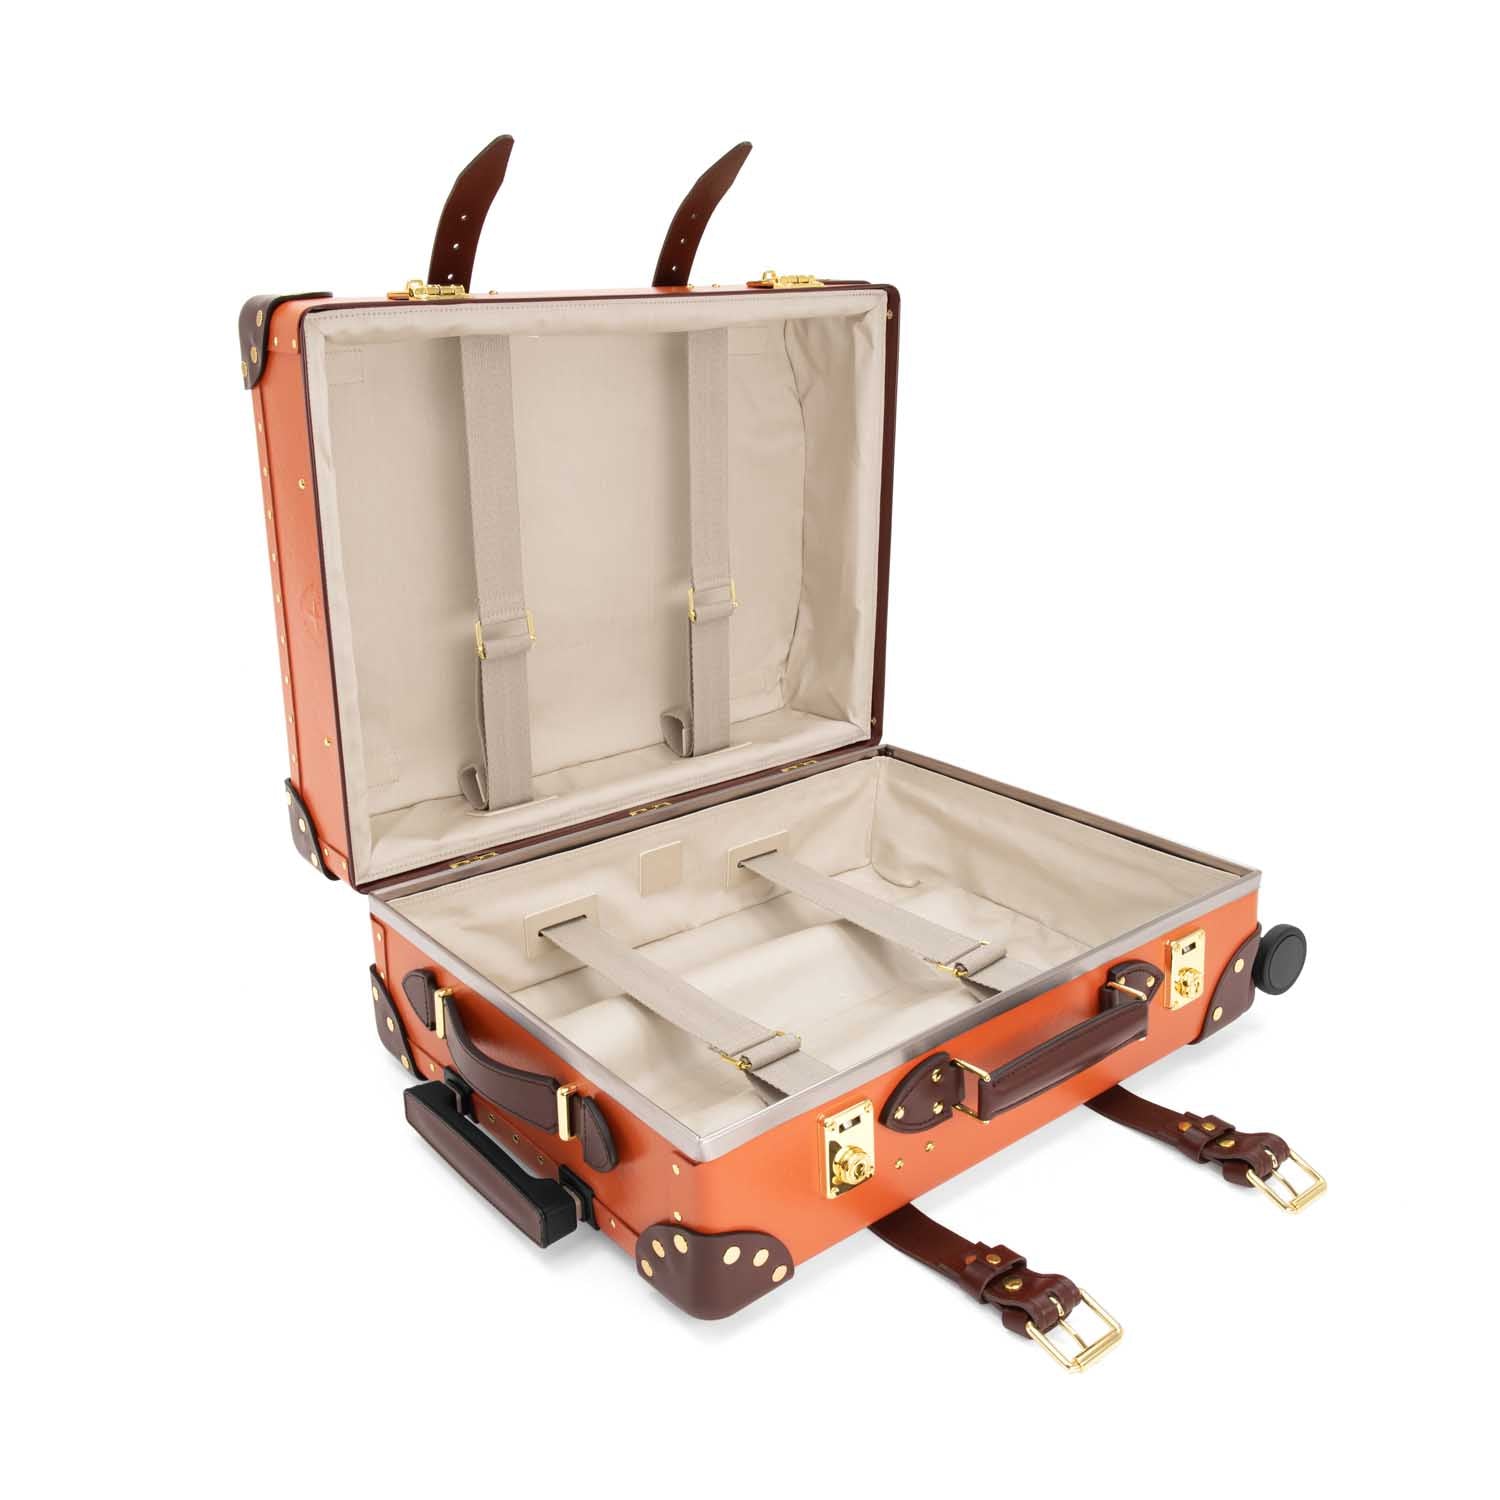 Centenary · Carry-On - 4 Wheels | Marmalade/Brown/Gold - Globe-Trotter Staging